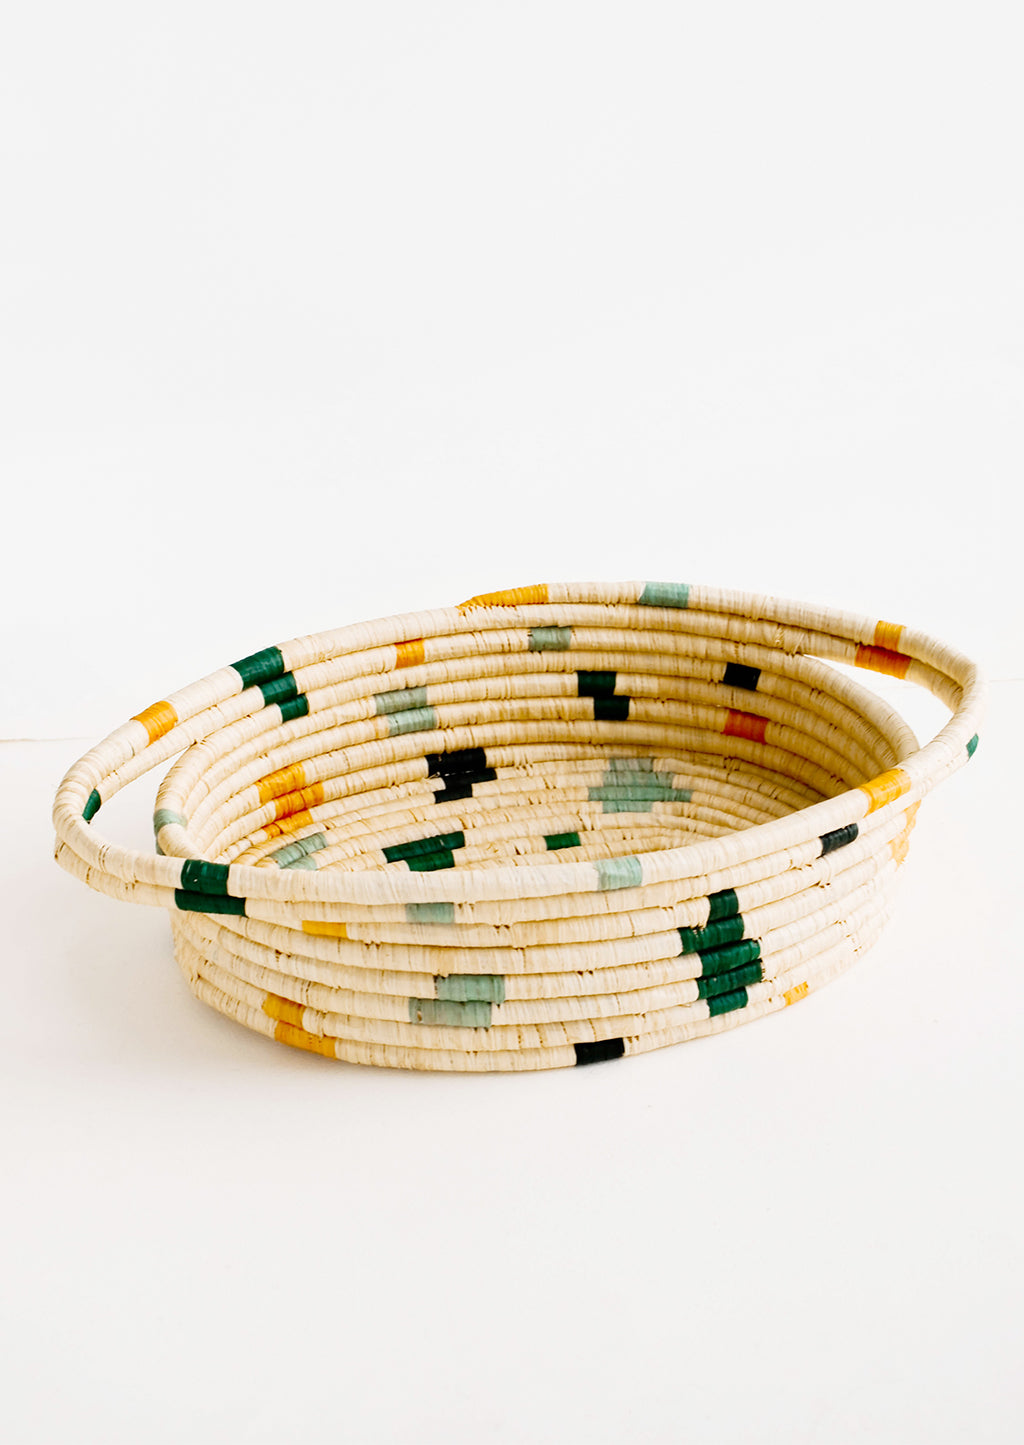 Forest Multi: Oval shaped, woven raffia basket with terrazzo inspired print in shades of green